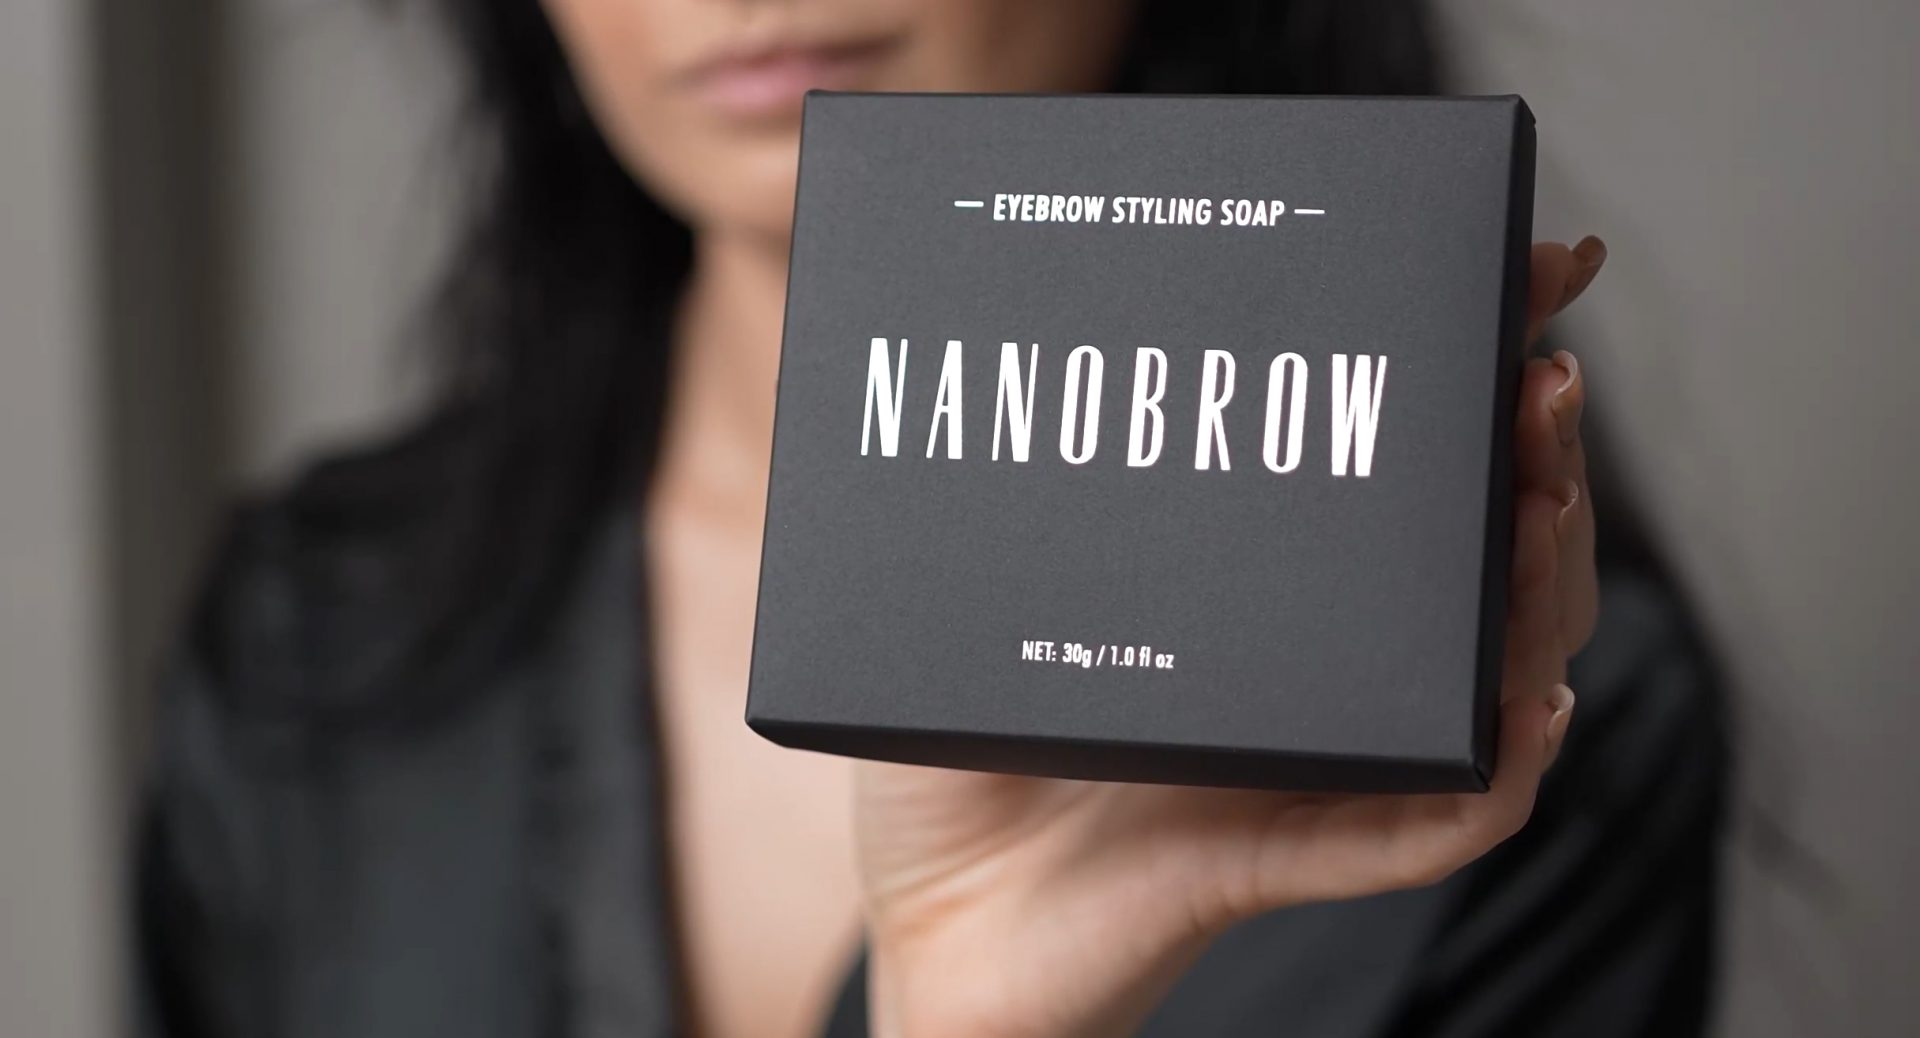 My way to get spectacular eyebrows? Only Nanobrow Eyebrow Styling Soap!